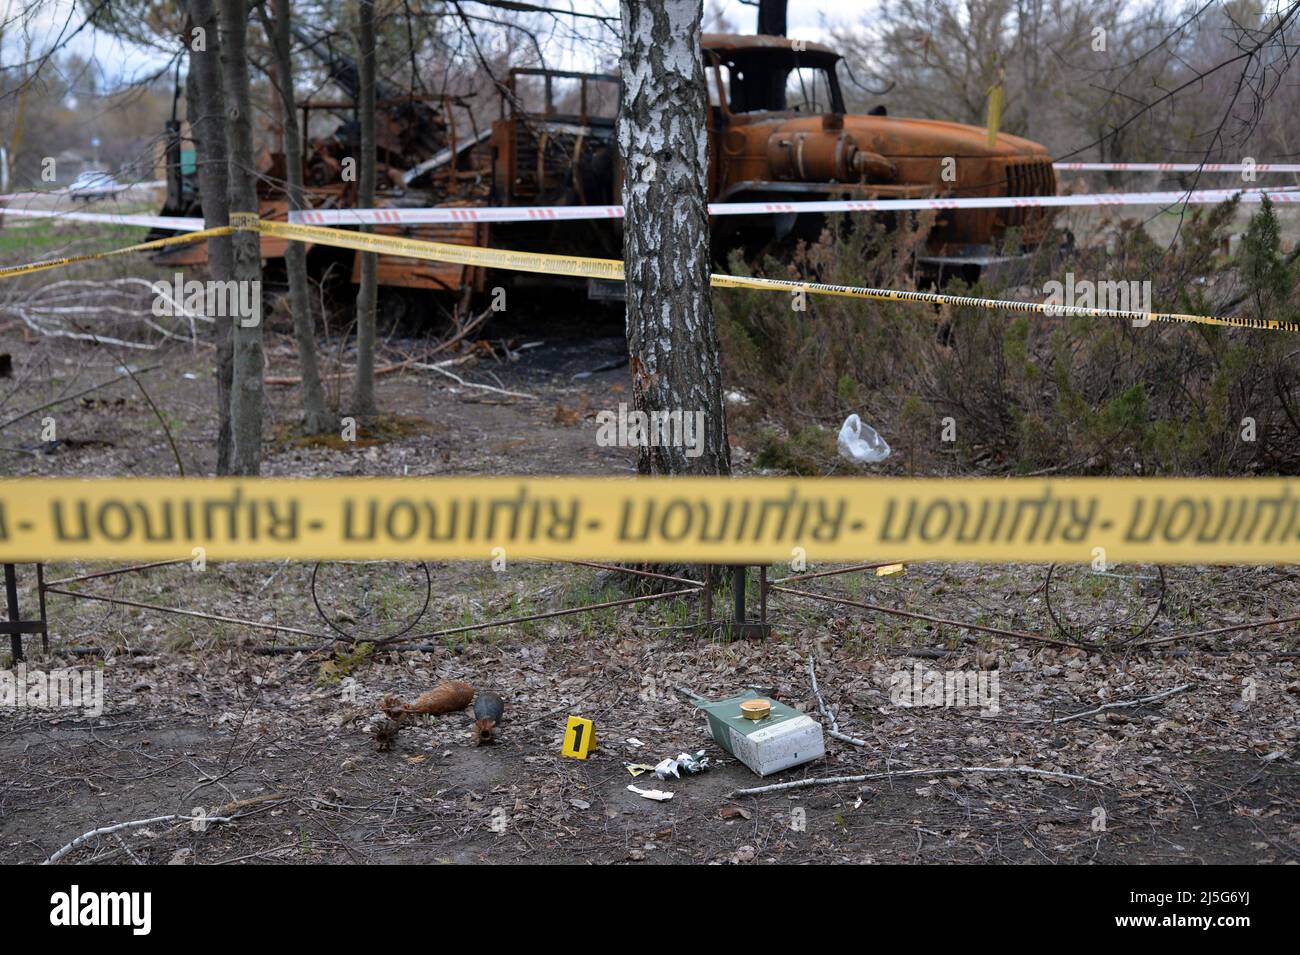 BERVYTSIA, UKRAINE - APRIL 21, 2022 - Ammunition and destroyed Russian vehicles are pictured in the village of Bervytsia liberated from Russian invade Stock Photo